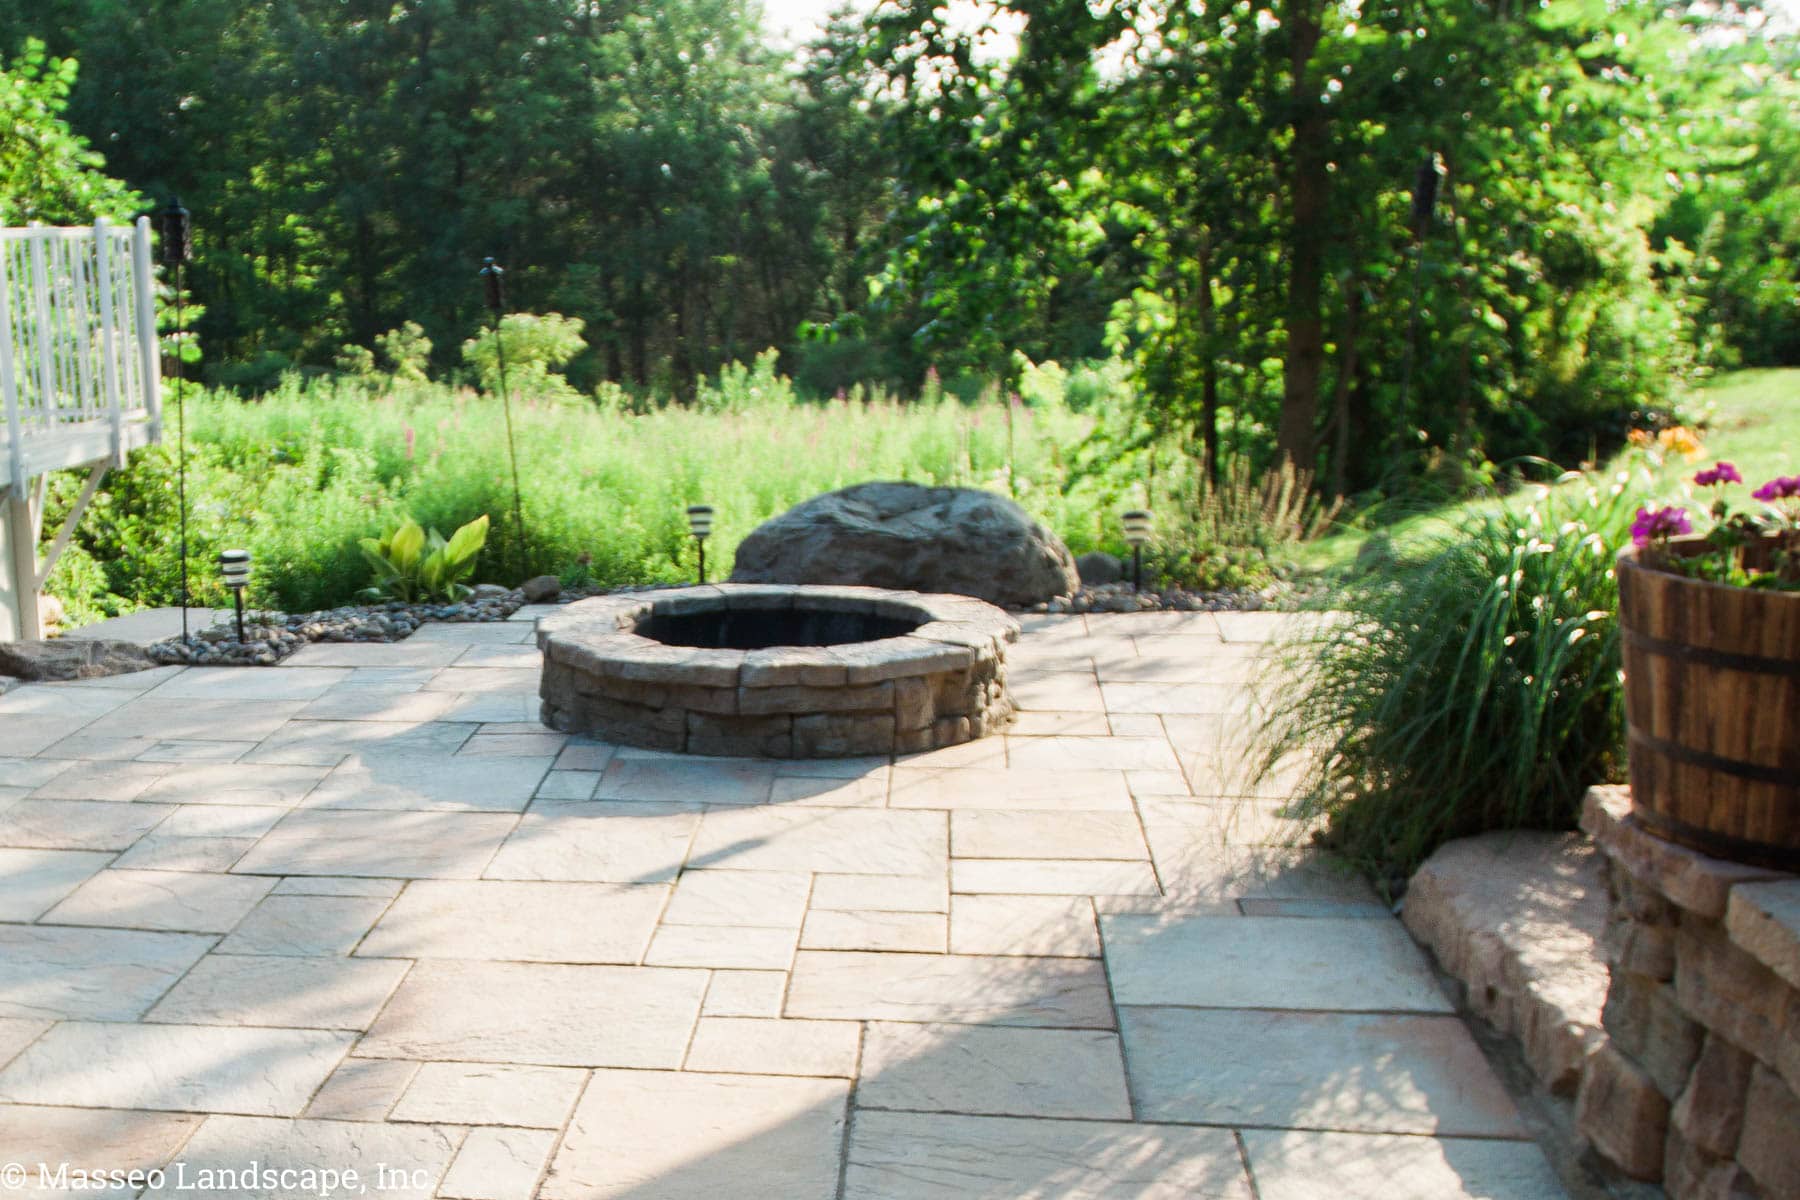 Rosetta round fire pit and patio designed and installed by Masseo Landscape, Inc, best New Paltz Landscaping Company